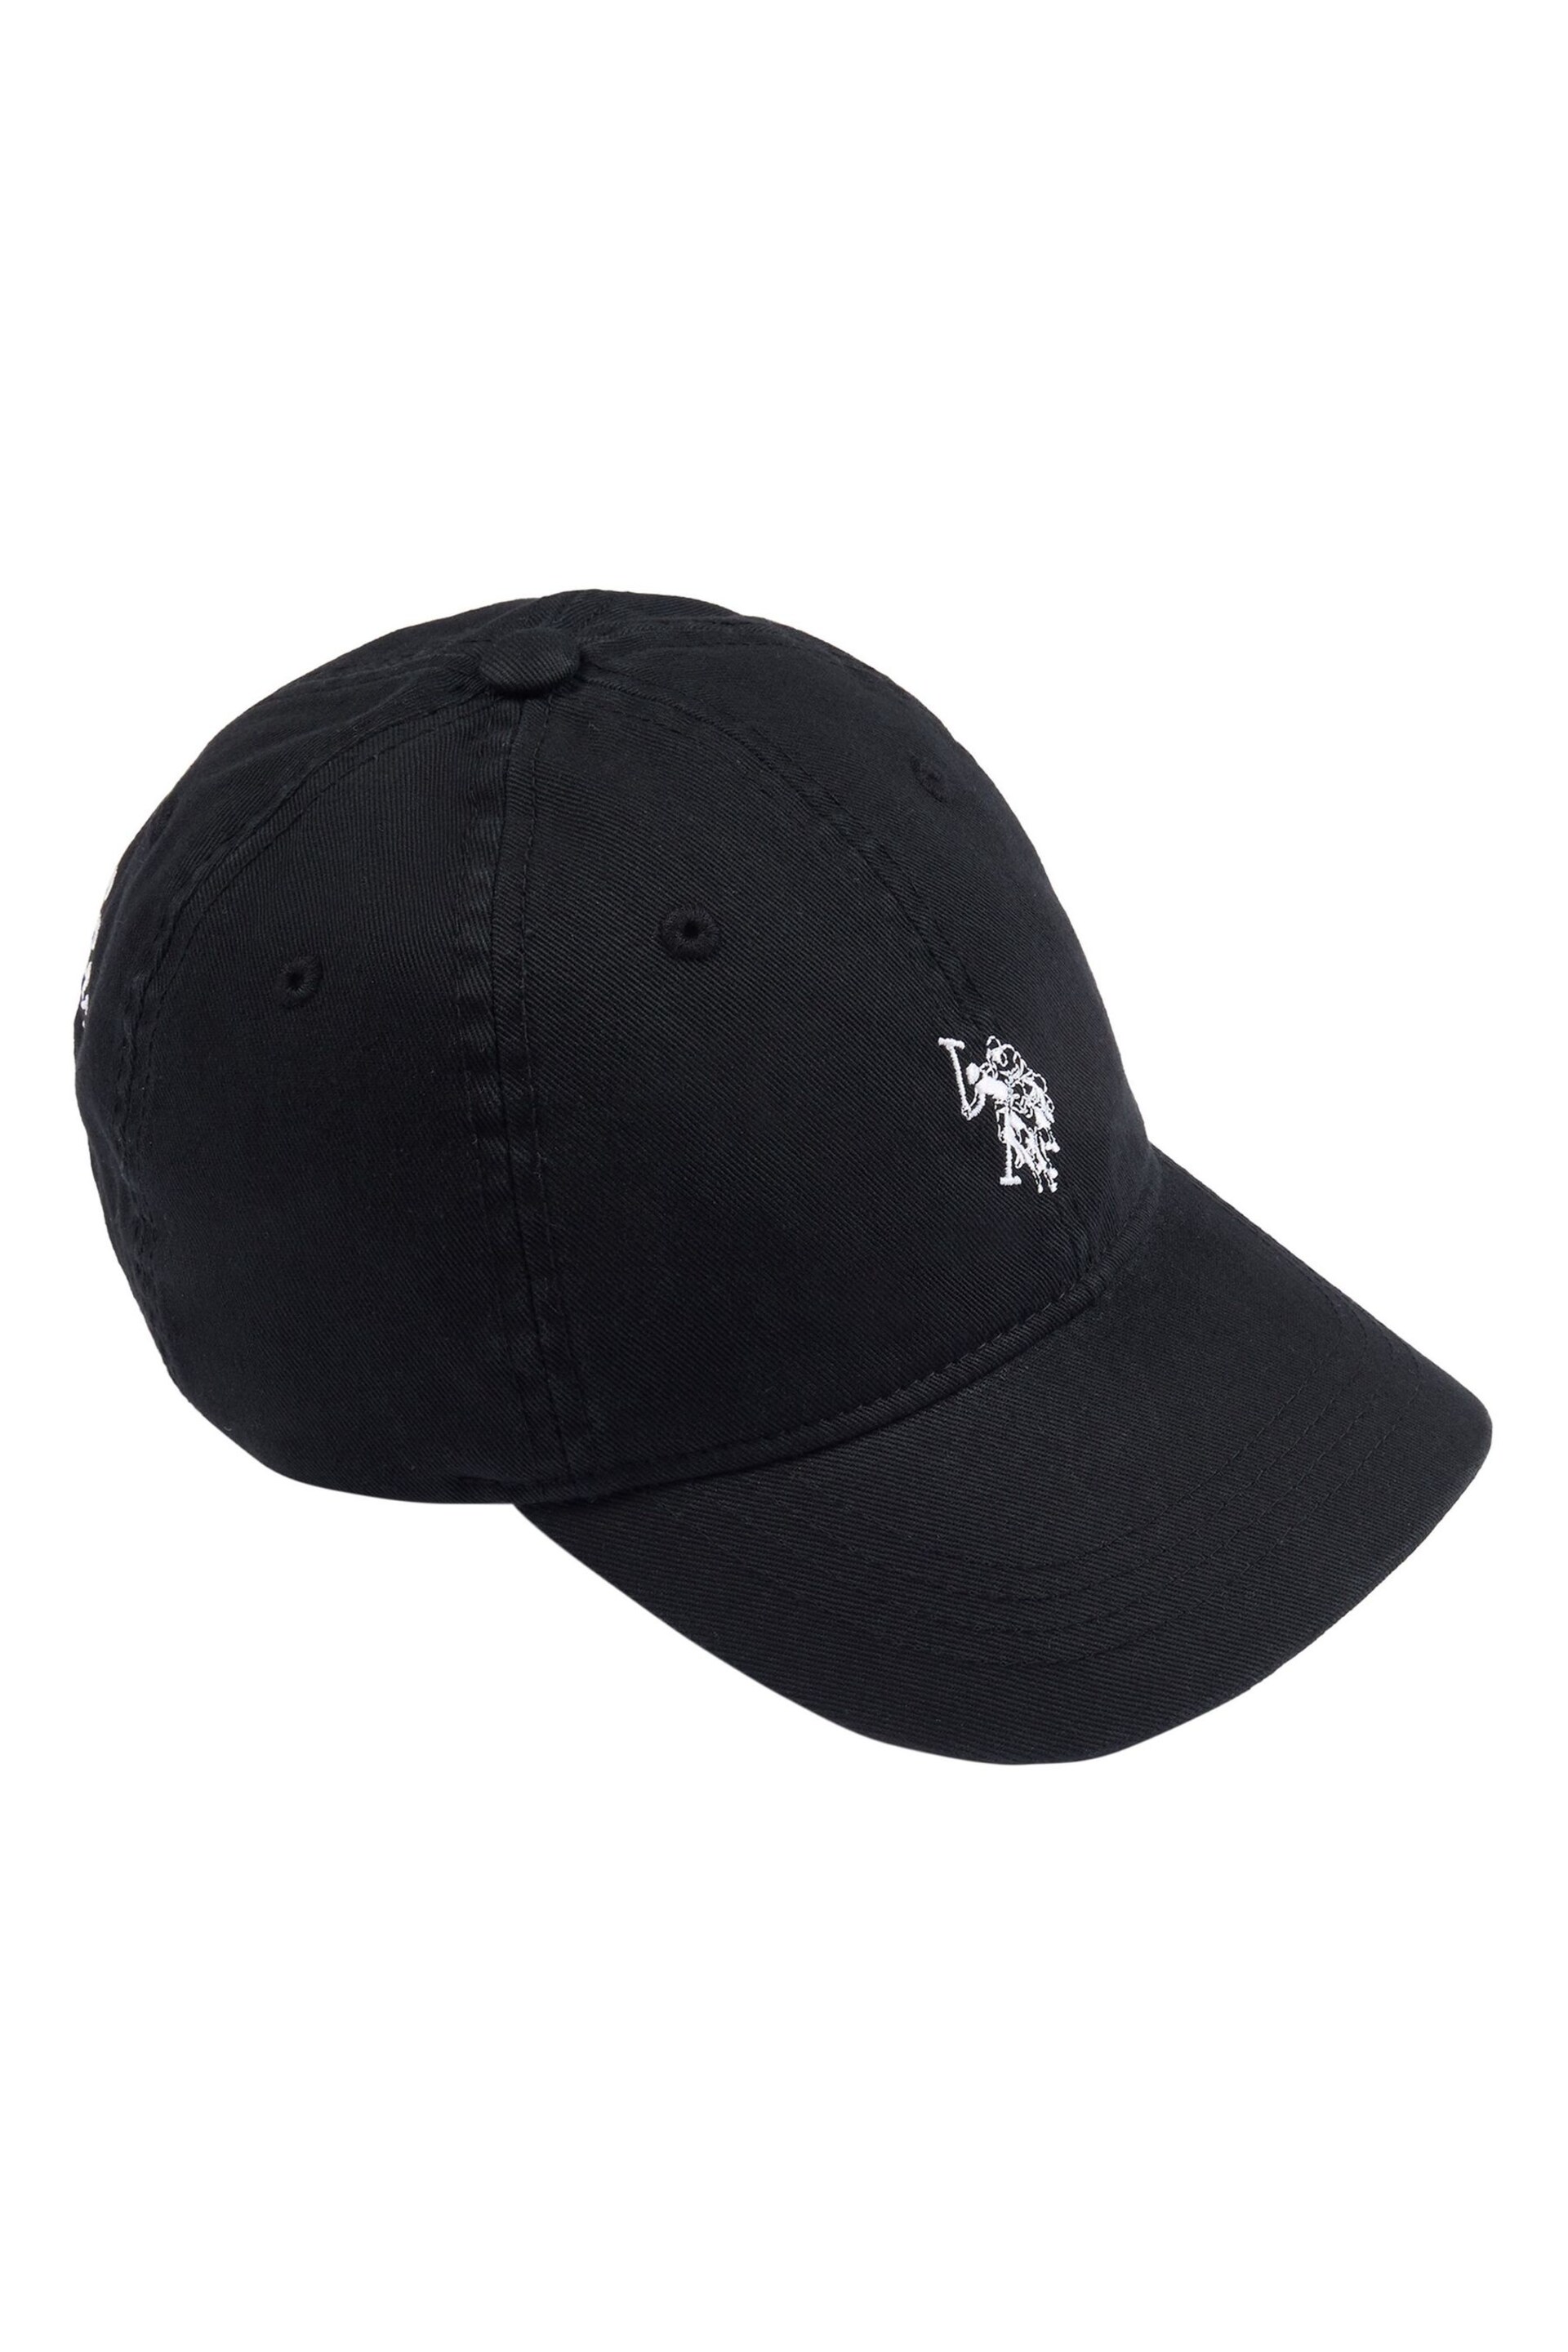 U.S. Polo Assn. Blue Boys Washed Canvas Cap - Image 1 of 2